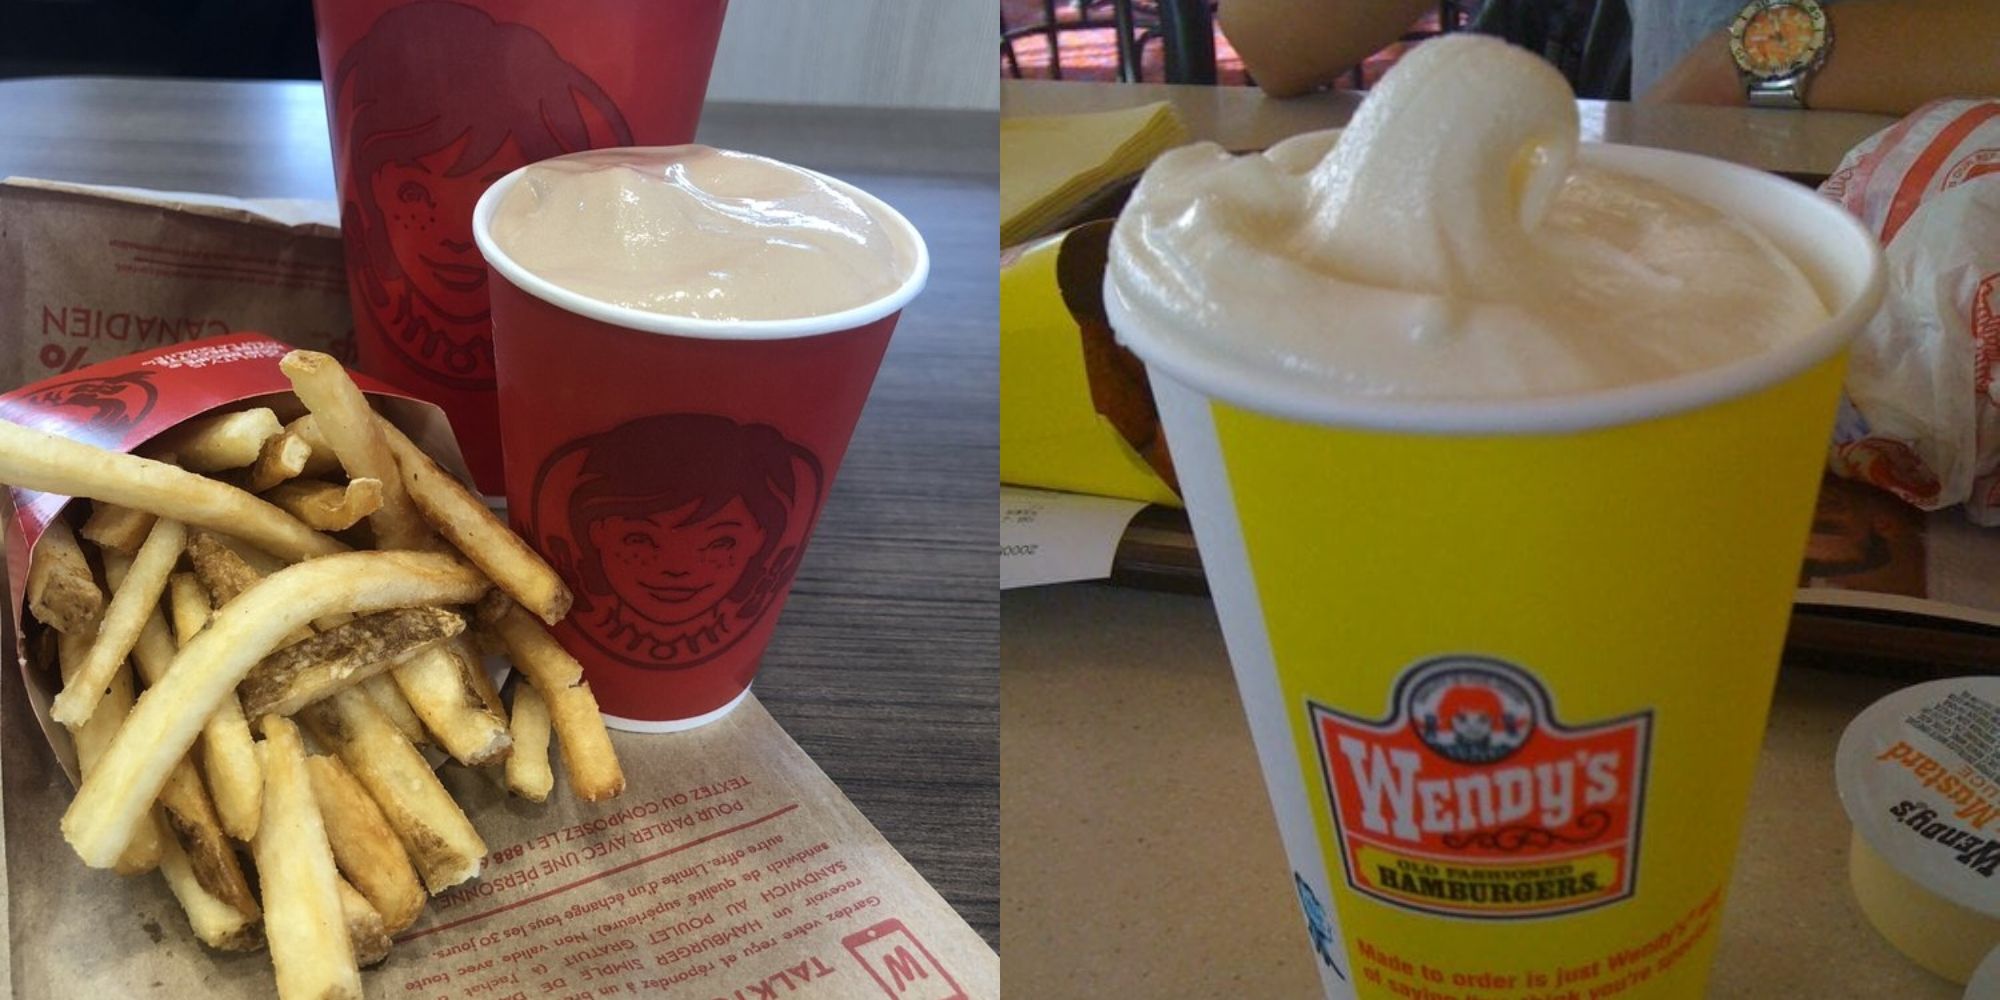 tray with carton of fries and wendy's frosty